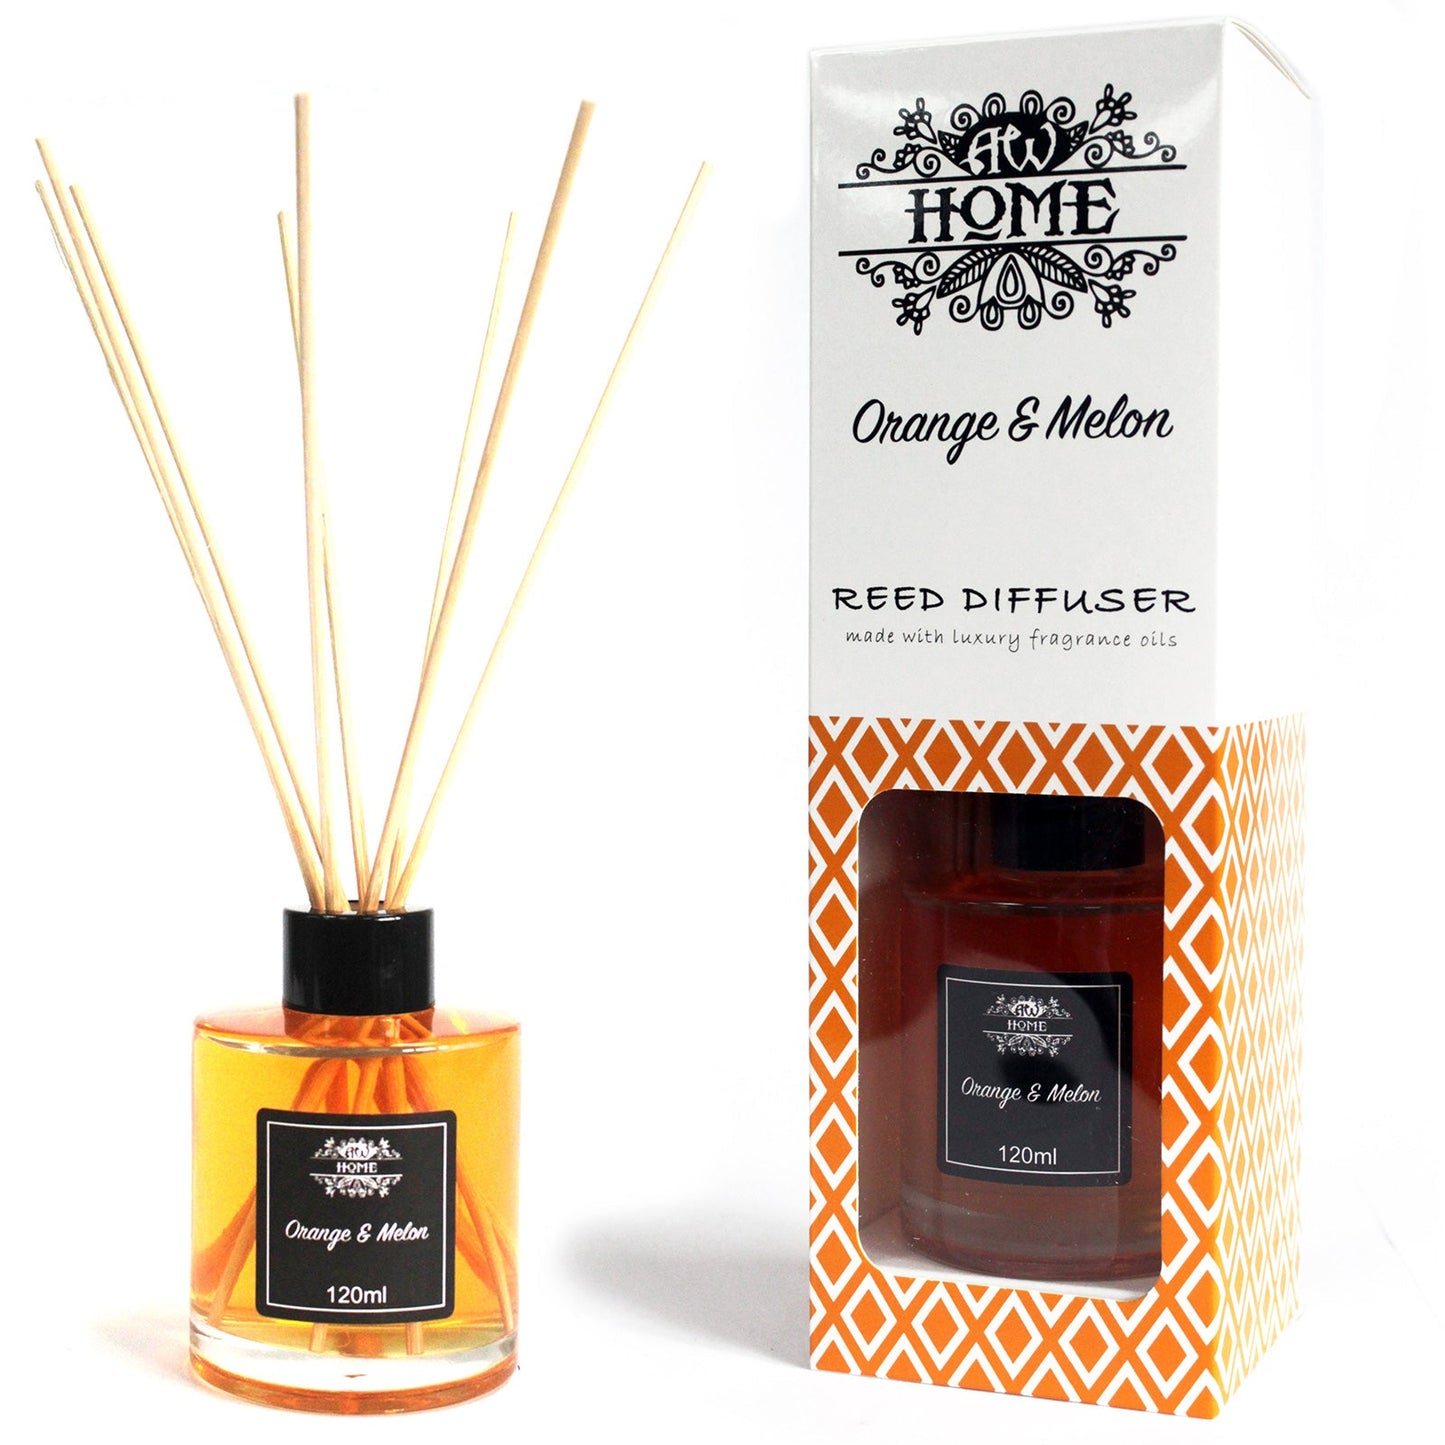 Home Fragrance Reed Diffuser - Various Fragrances - 120ml Home Fragrance Reed Diffusers - 120ml Soul Inspired Orange & Melon 